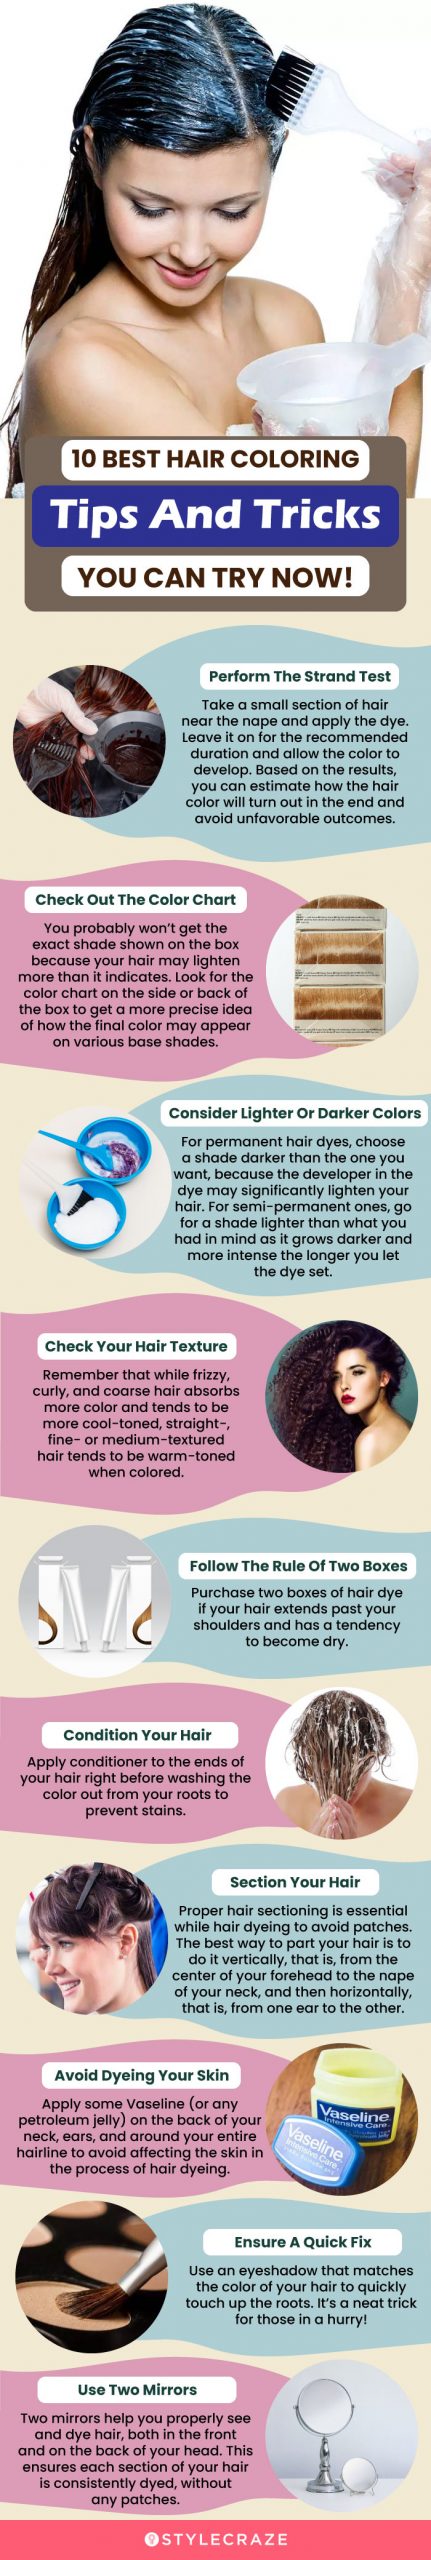 10 best hair coloring tips and tricks you can try now (infographic)